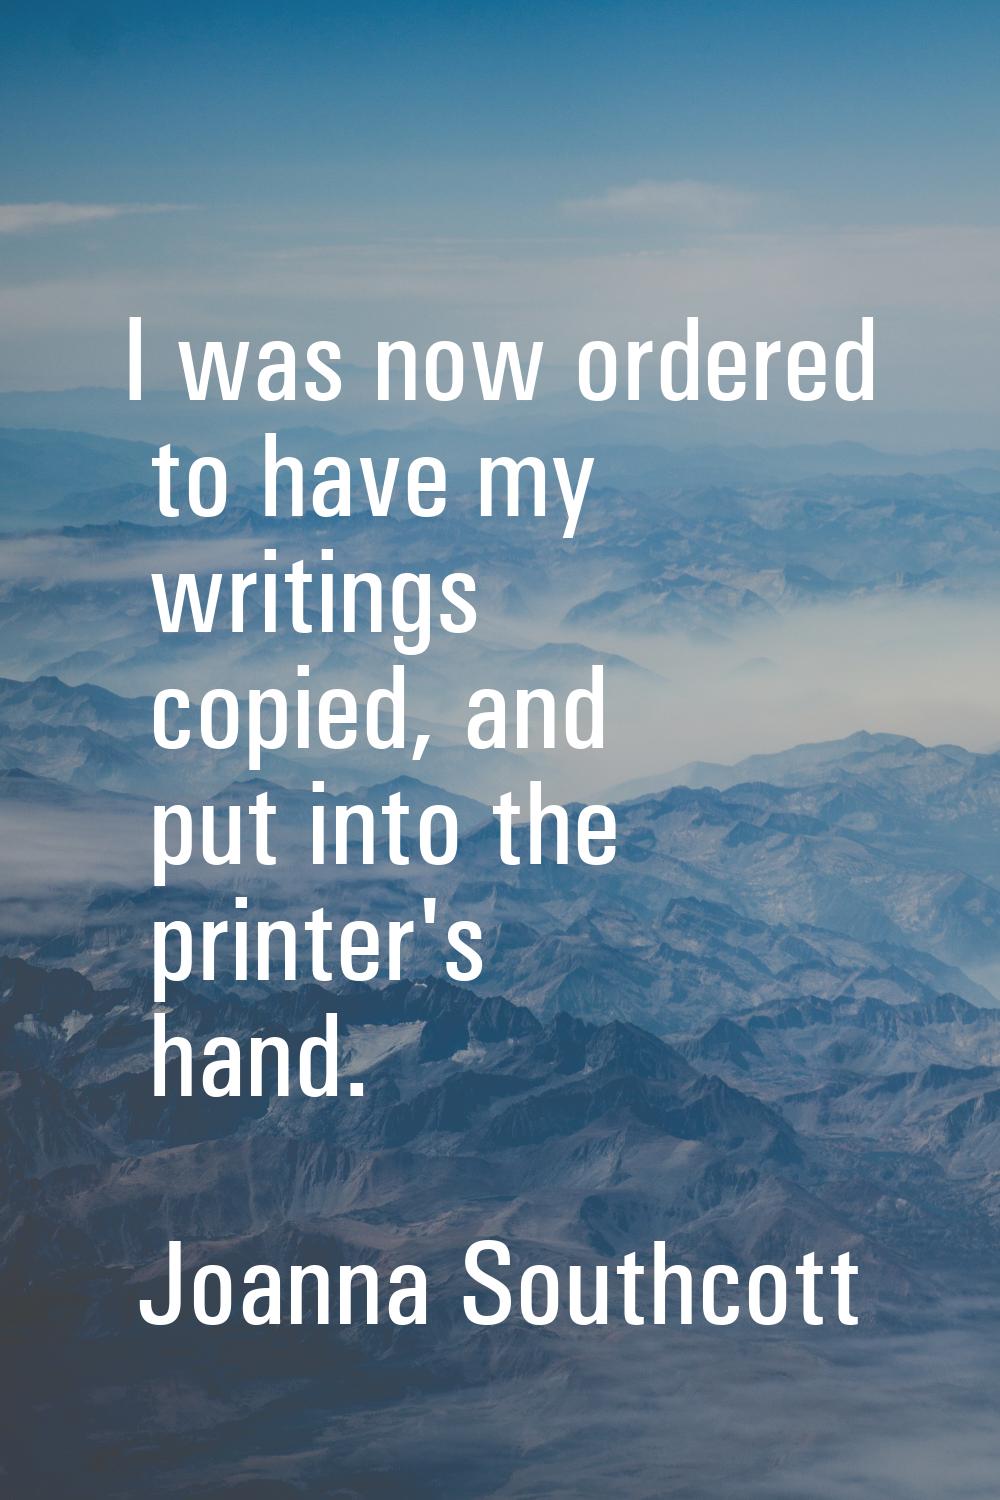 I was now ordered to have my writings copied, and put into the printer's hand.